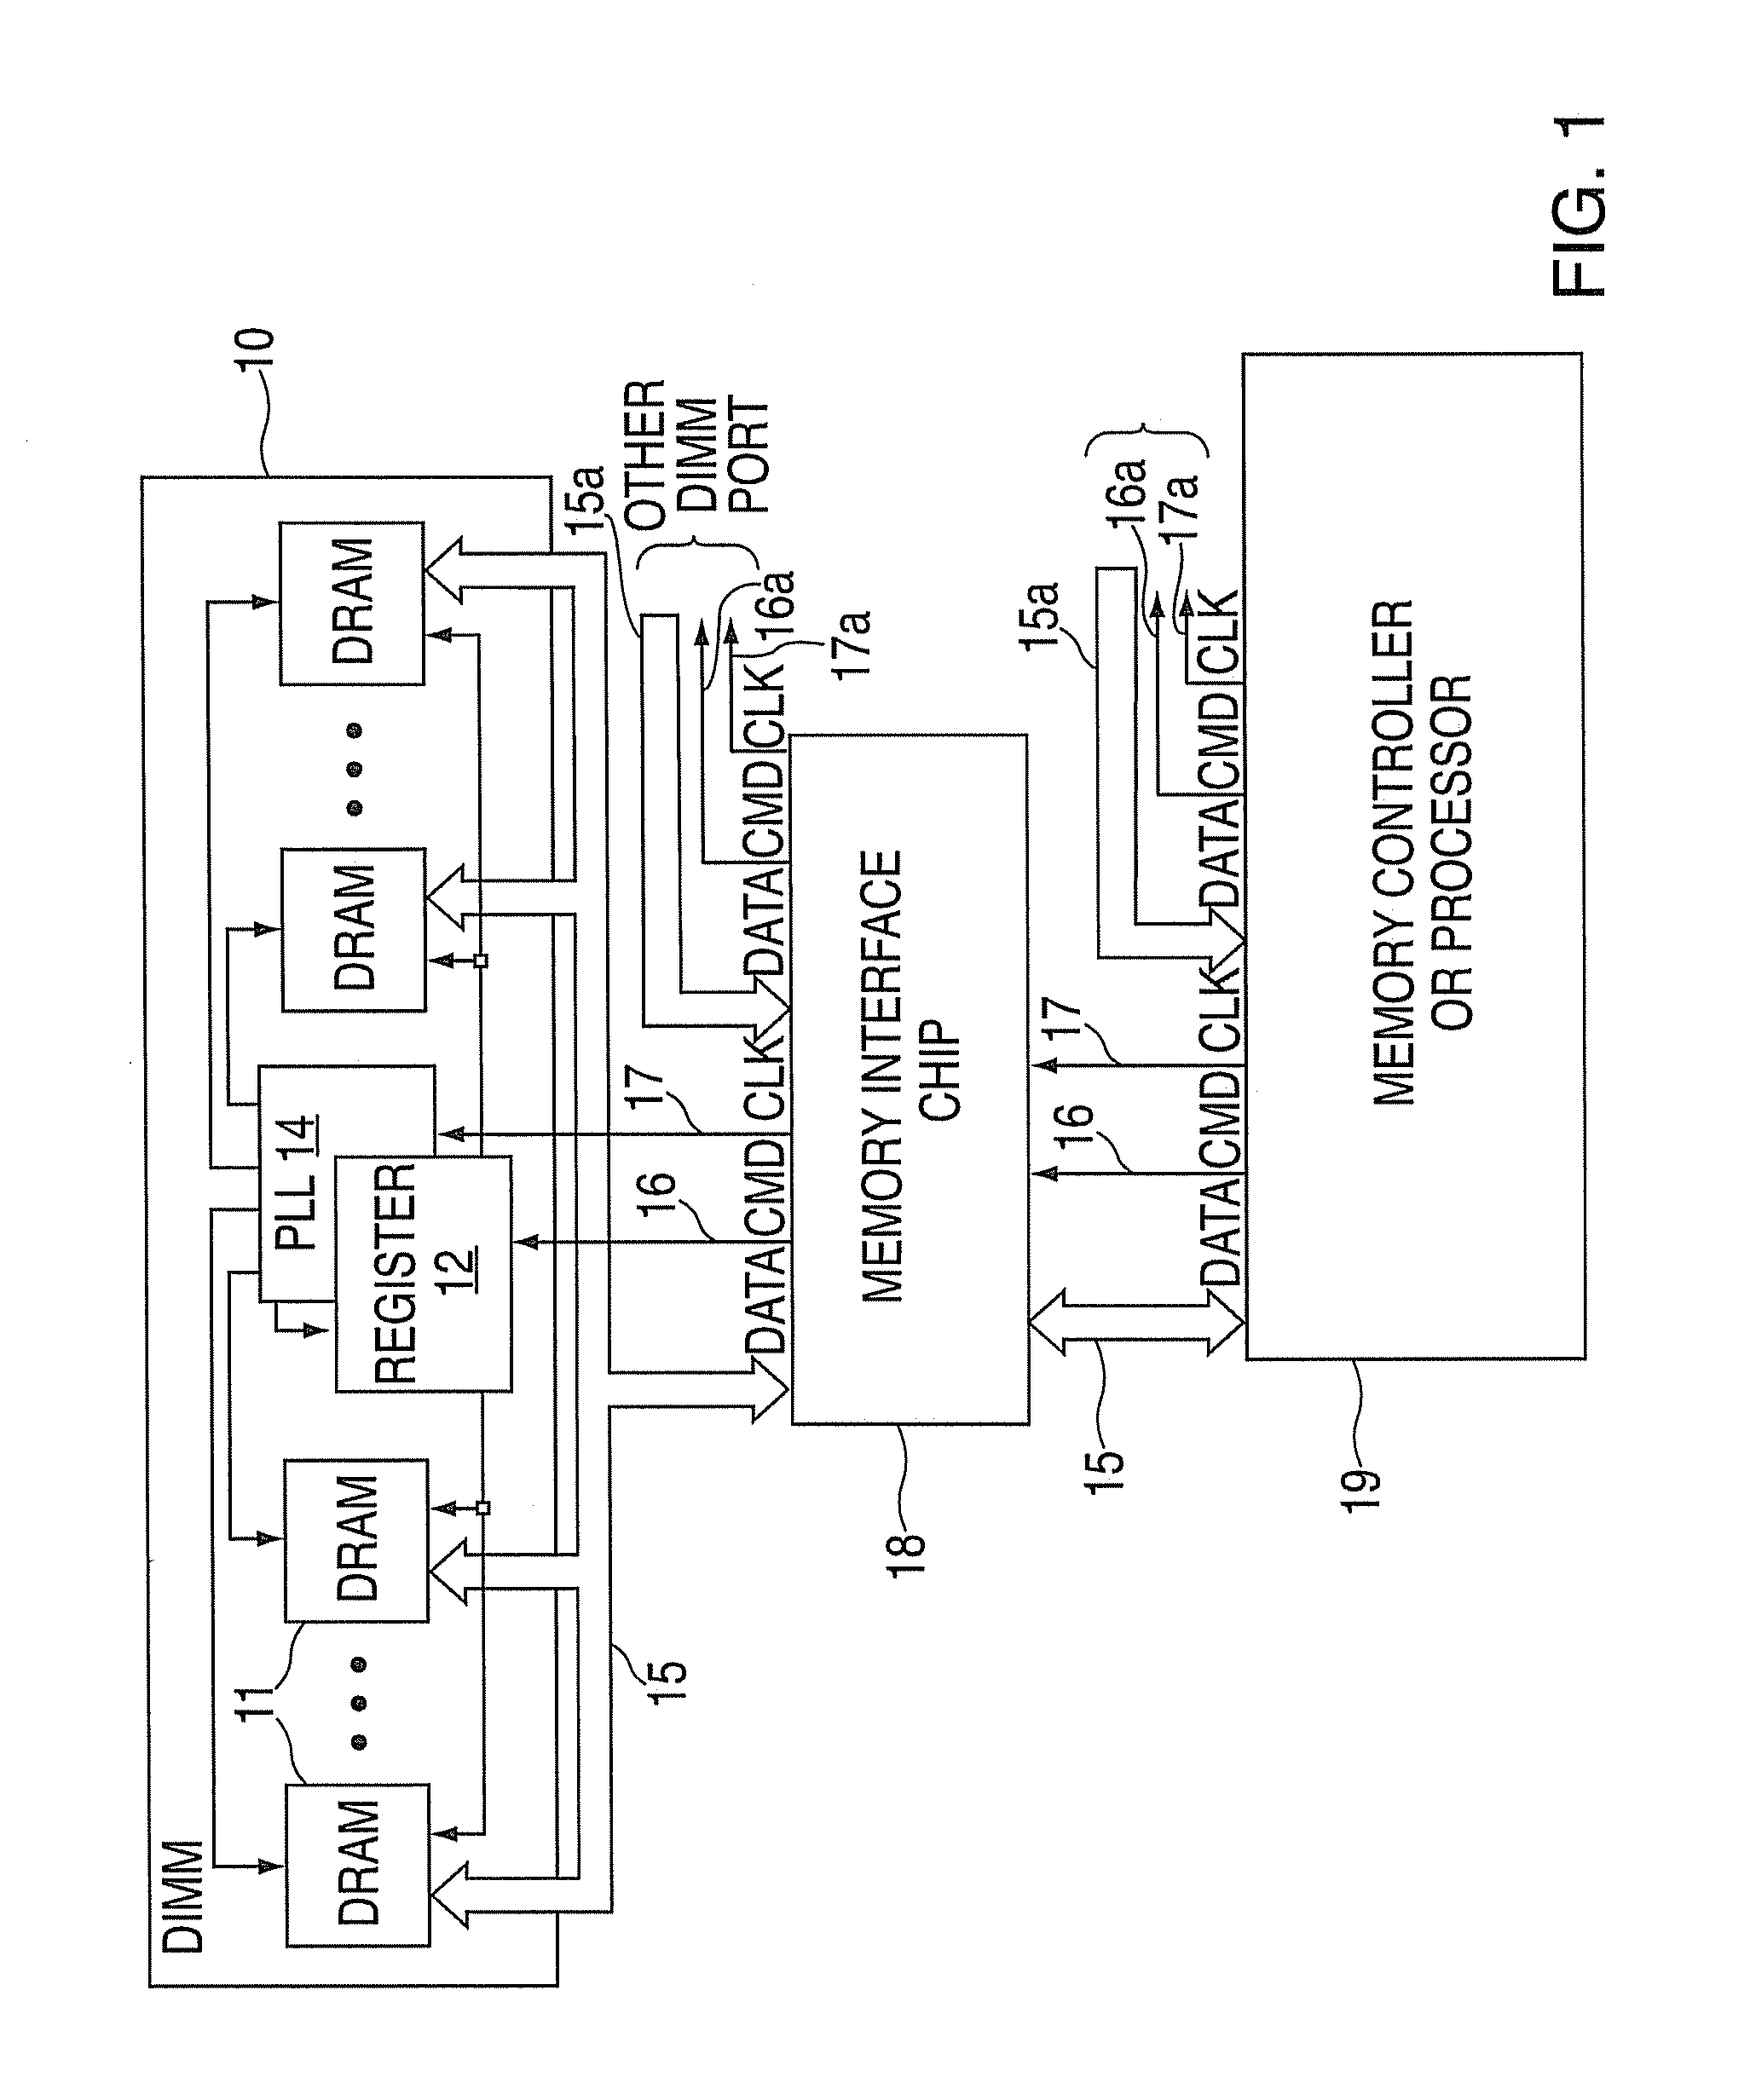 High density high reliability memory module with power gating and a fault tolerant address and command bus